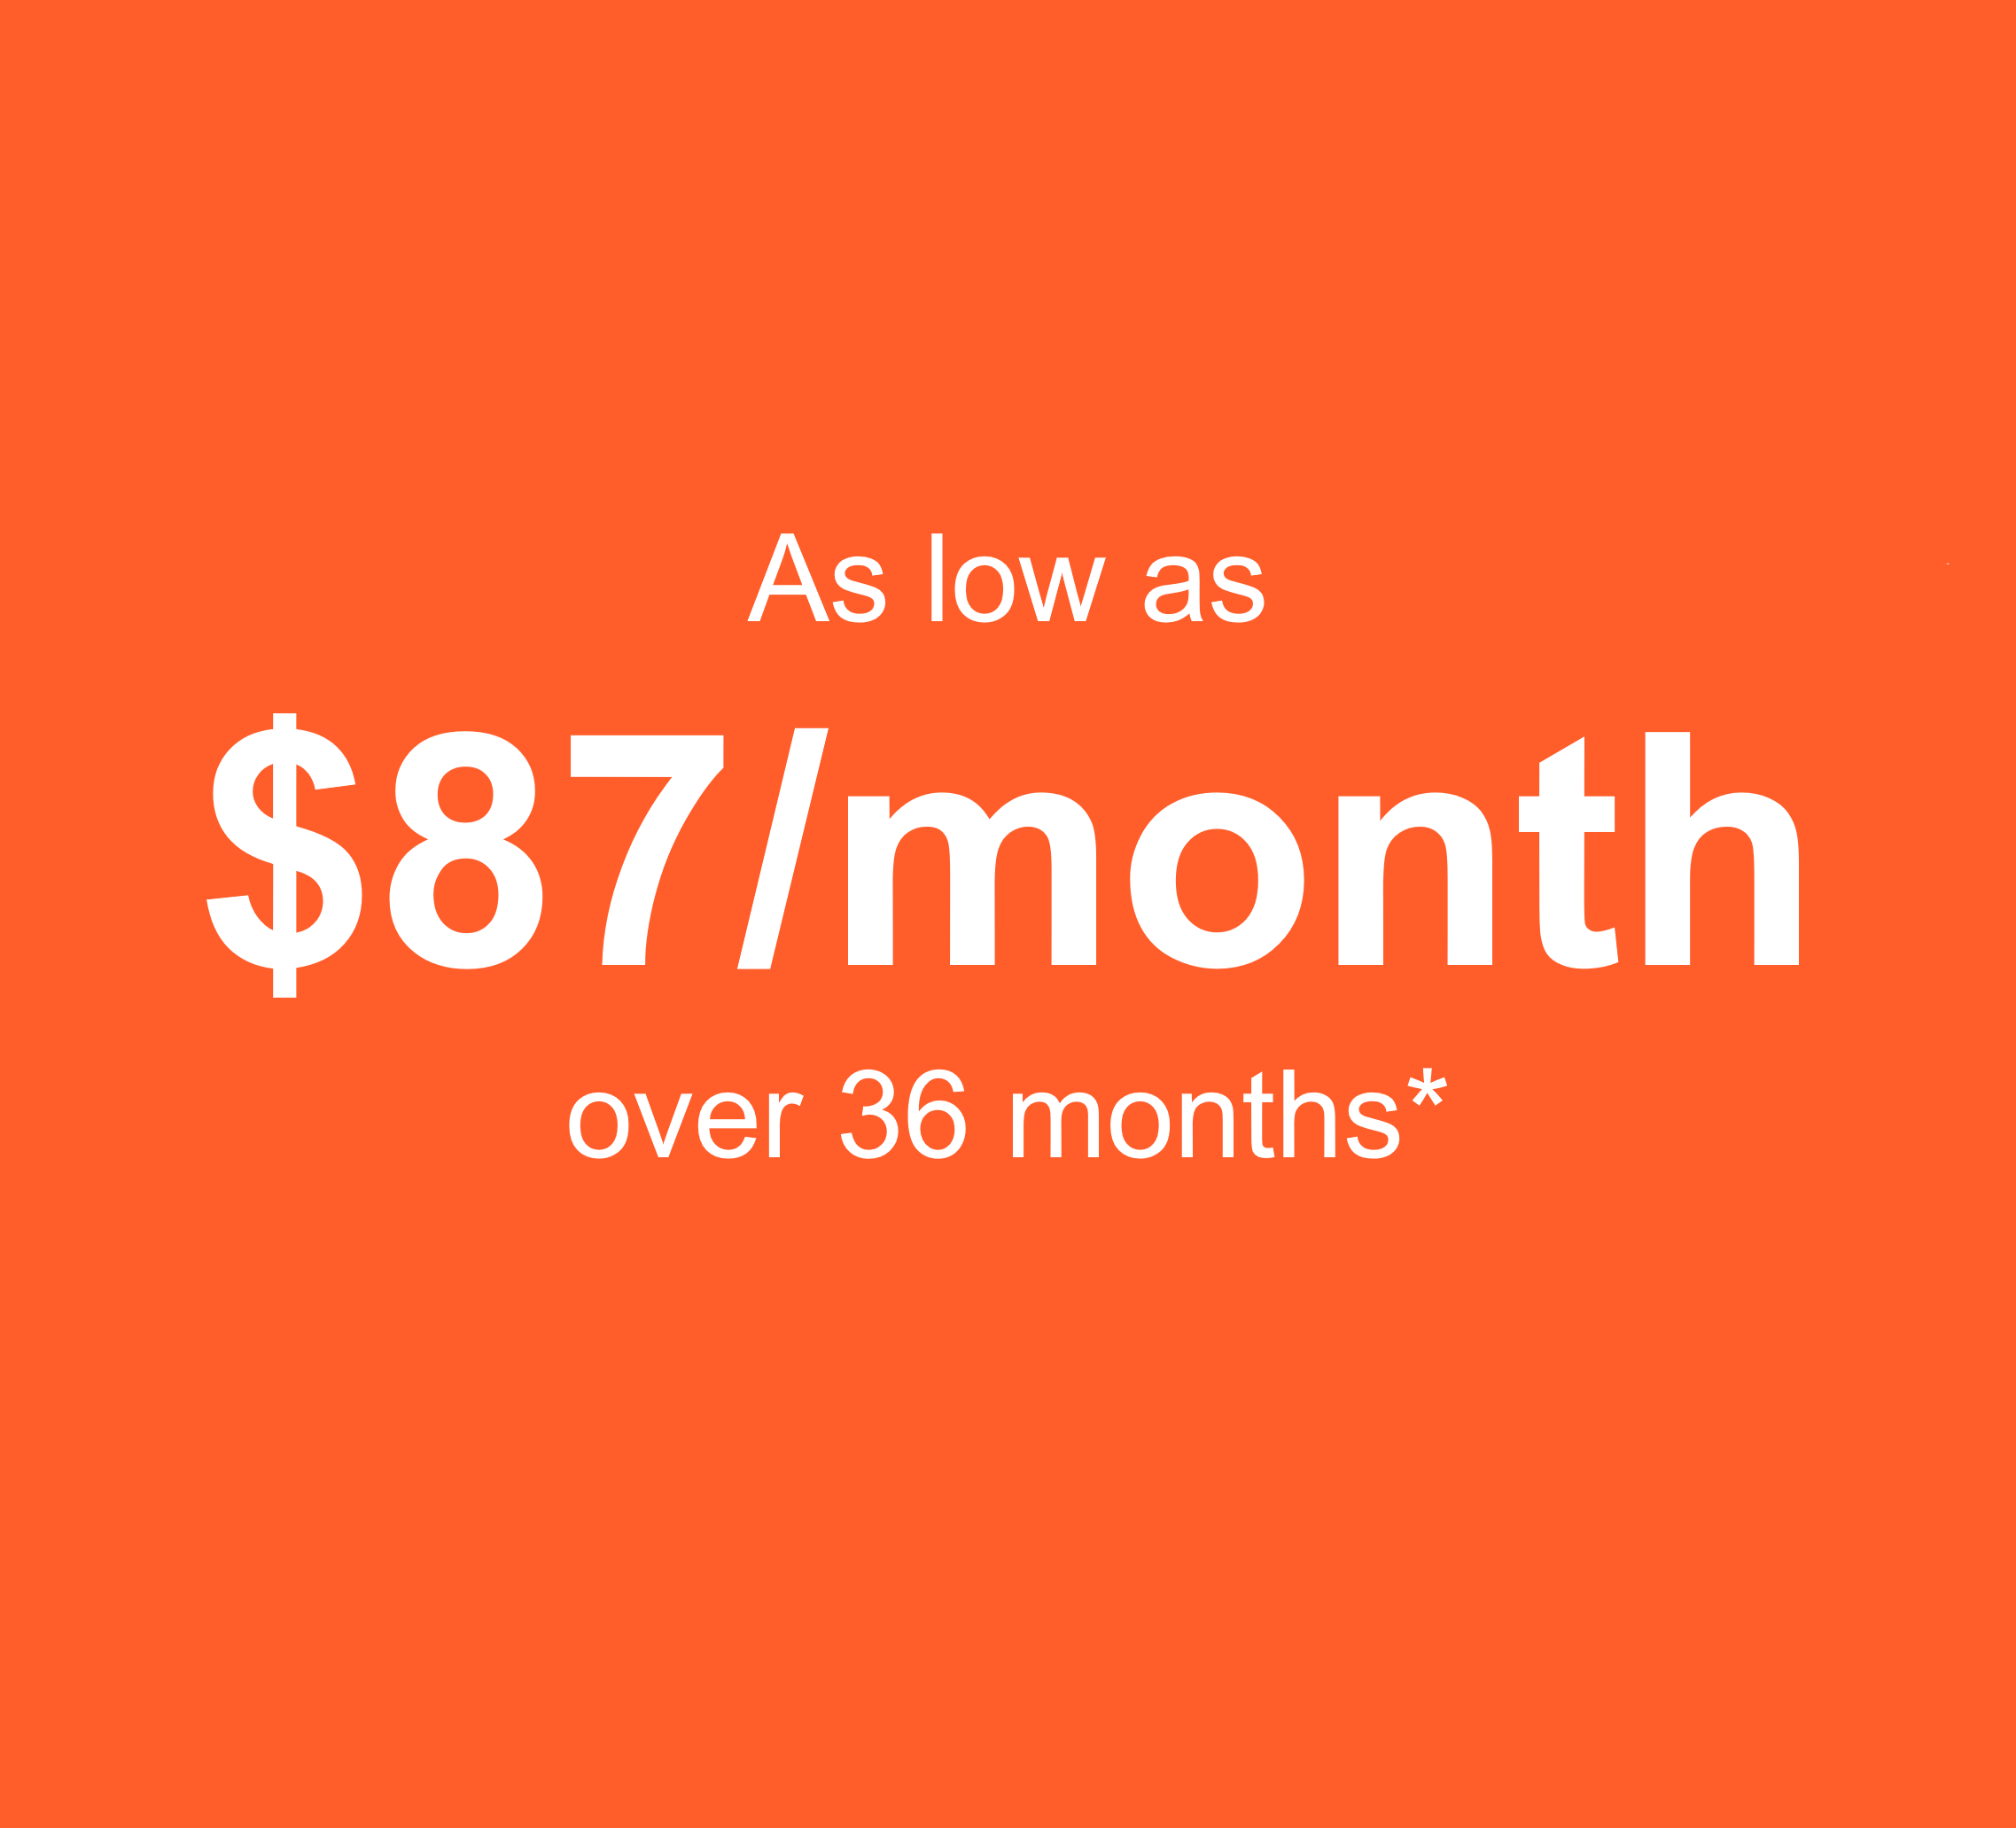 As low as $87/month over 36 months with 9.99% APR